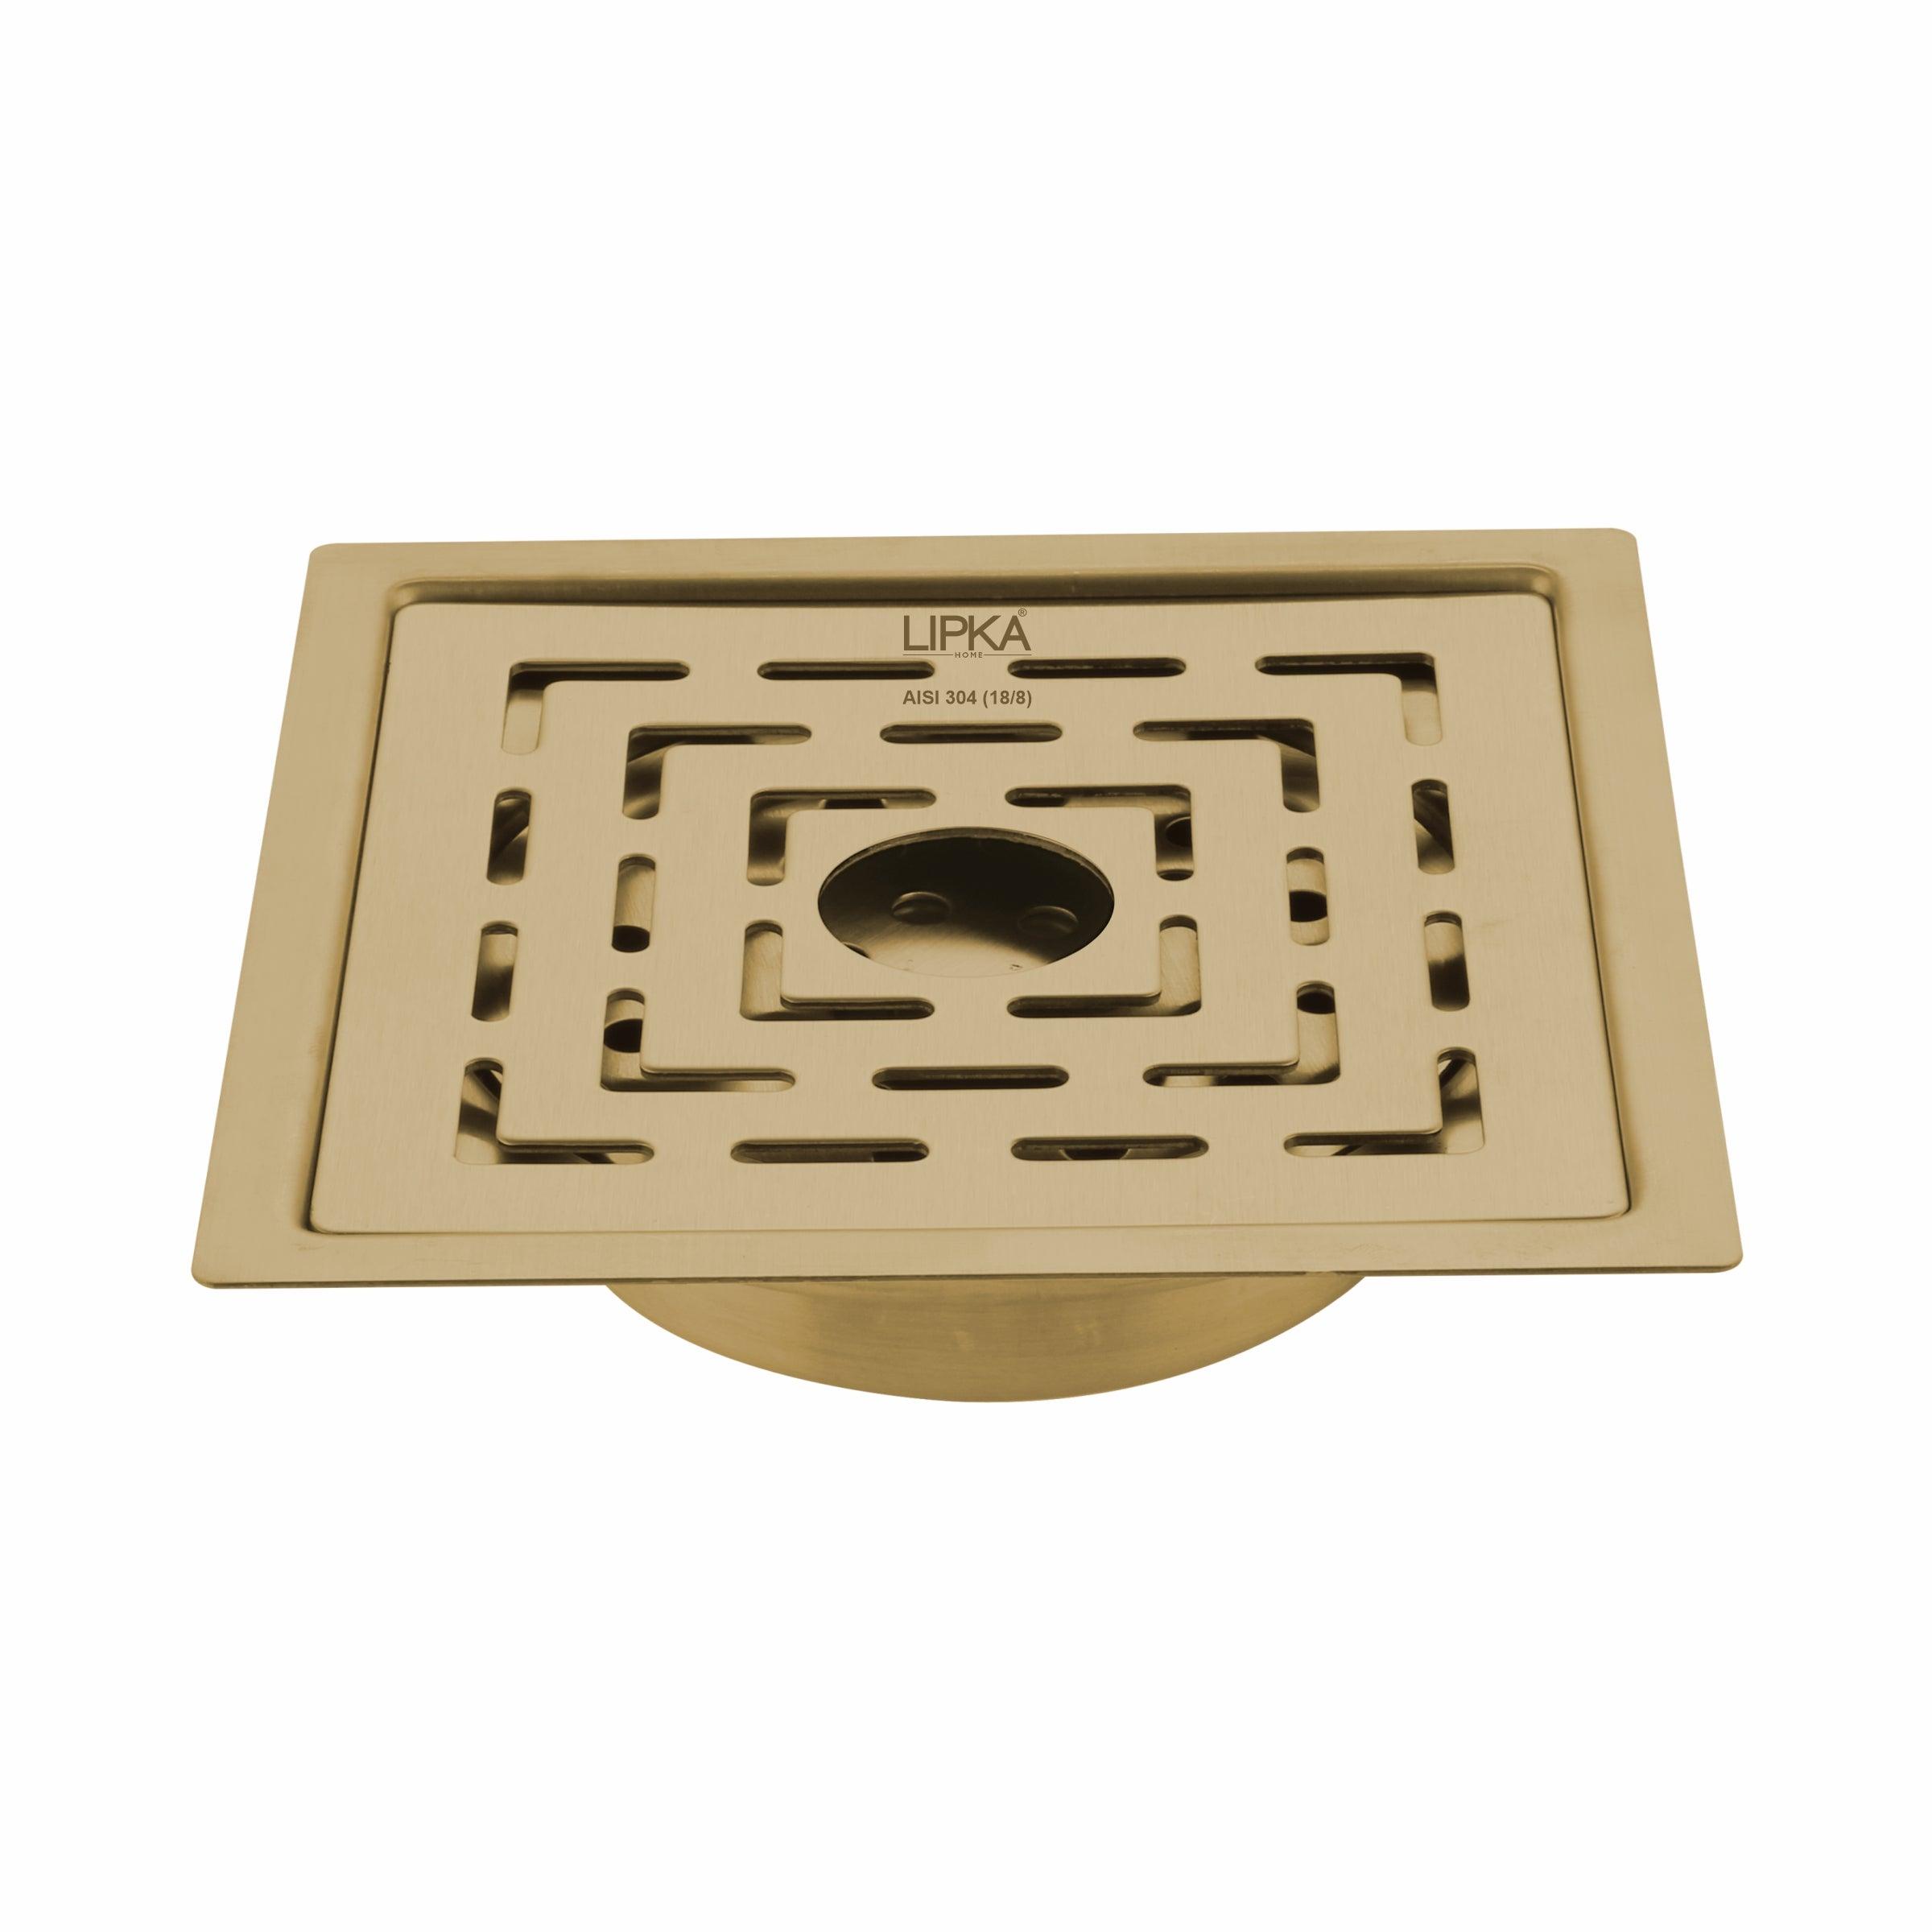 Orange Flat Cut Exclusive Square Floor Drain in Yellow Gold PVD Coating (5 x 5 Inches) with Hole & Cockroach Trap - LIPKA - Lipka Home